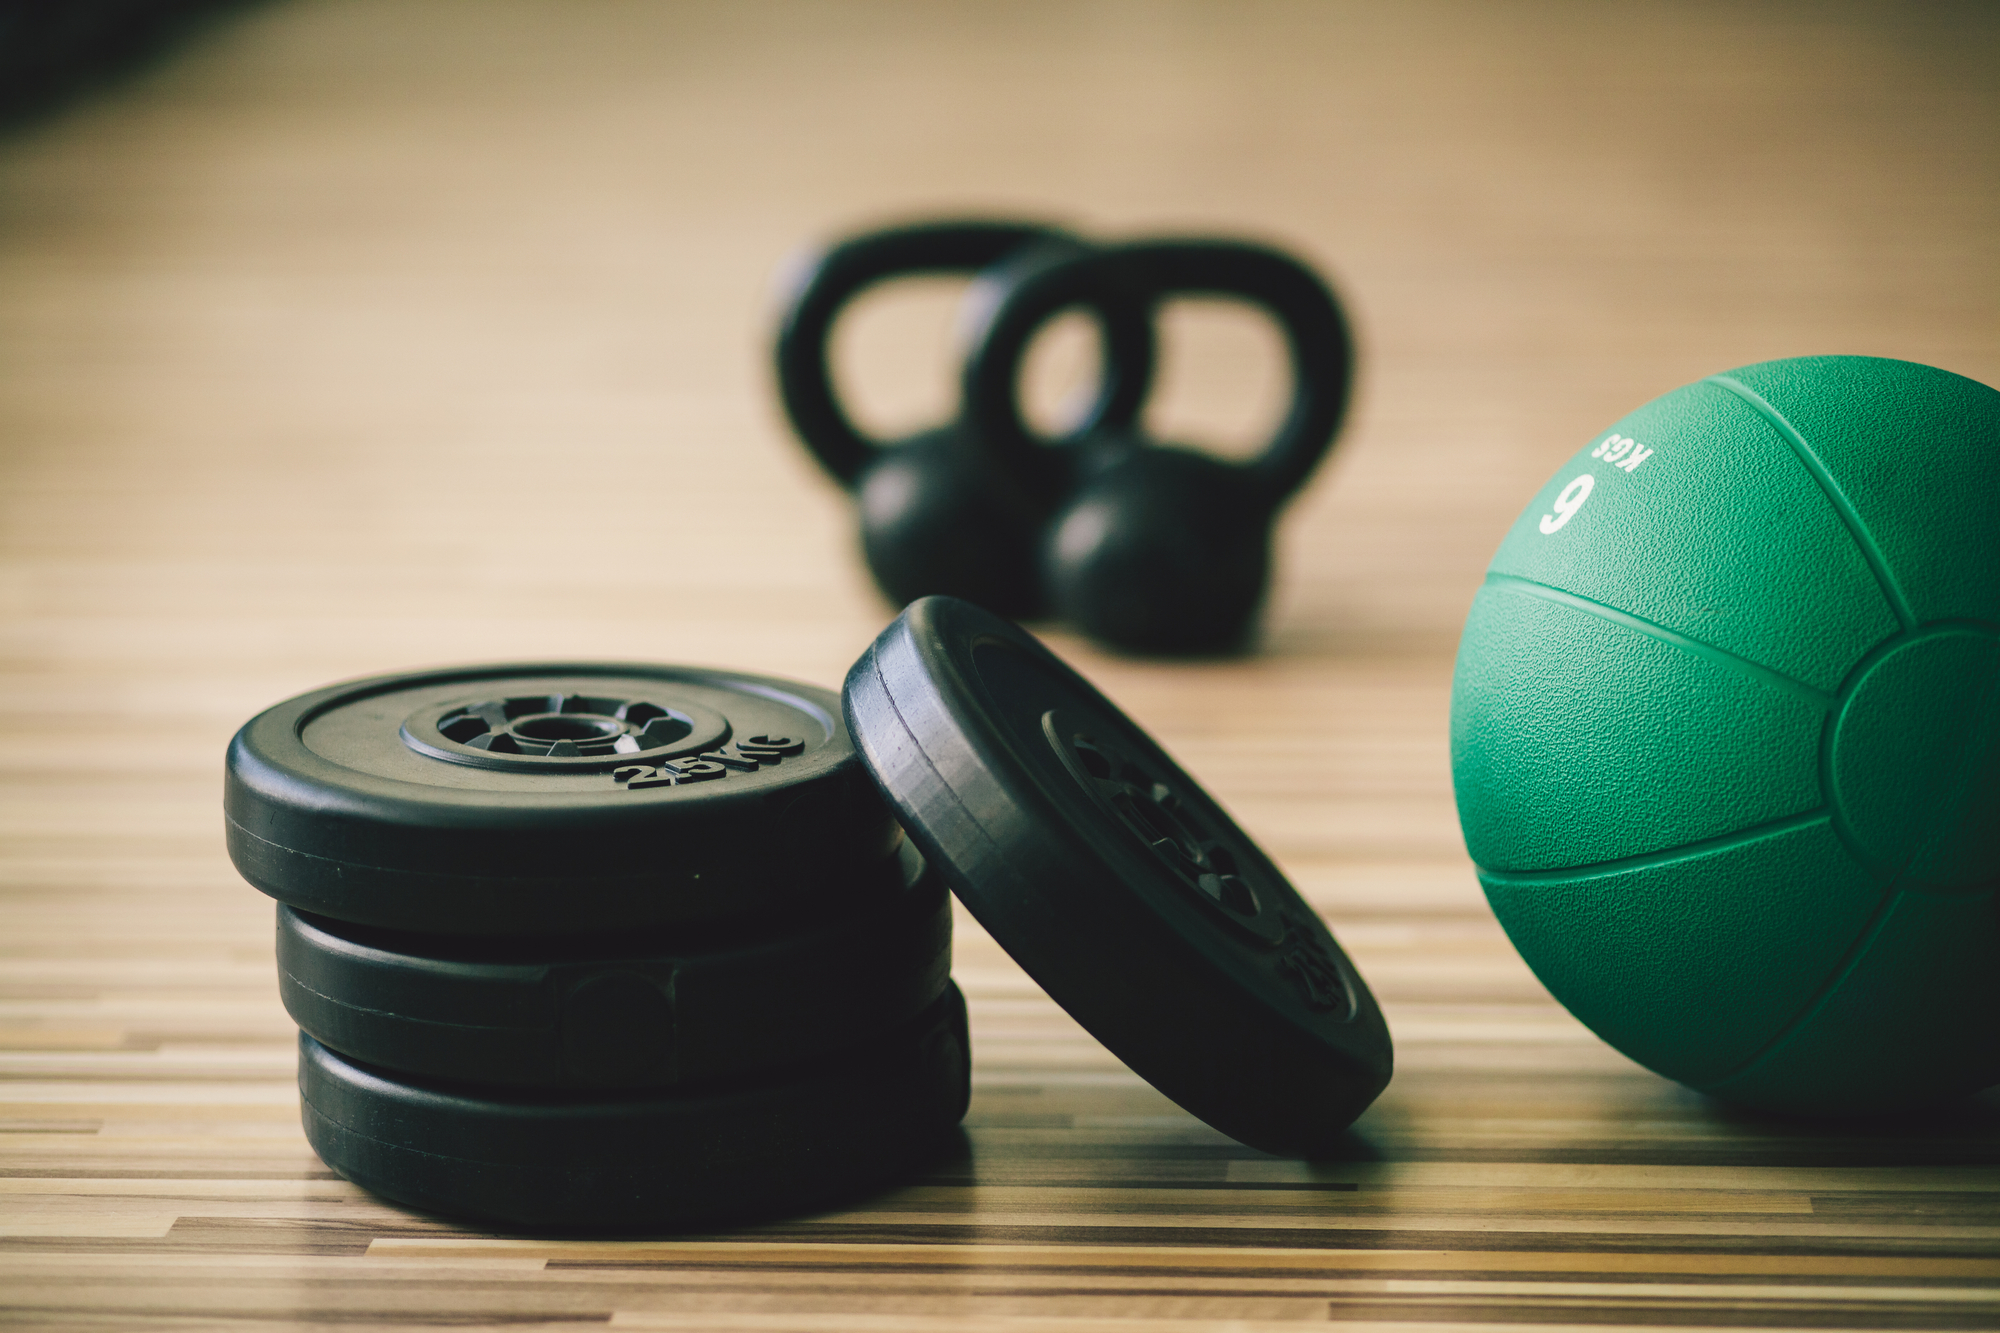 Sports Therapy Rosedale, MD - weights and medicine ball fitness background